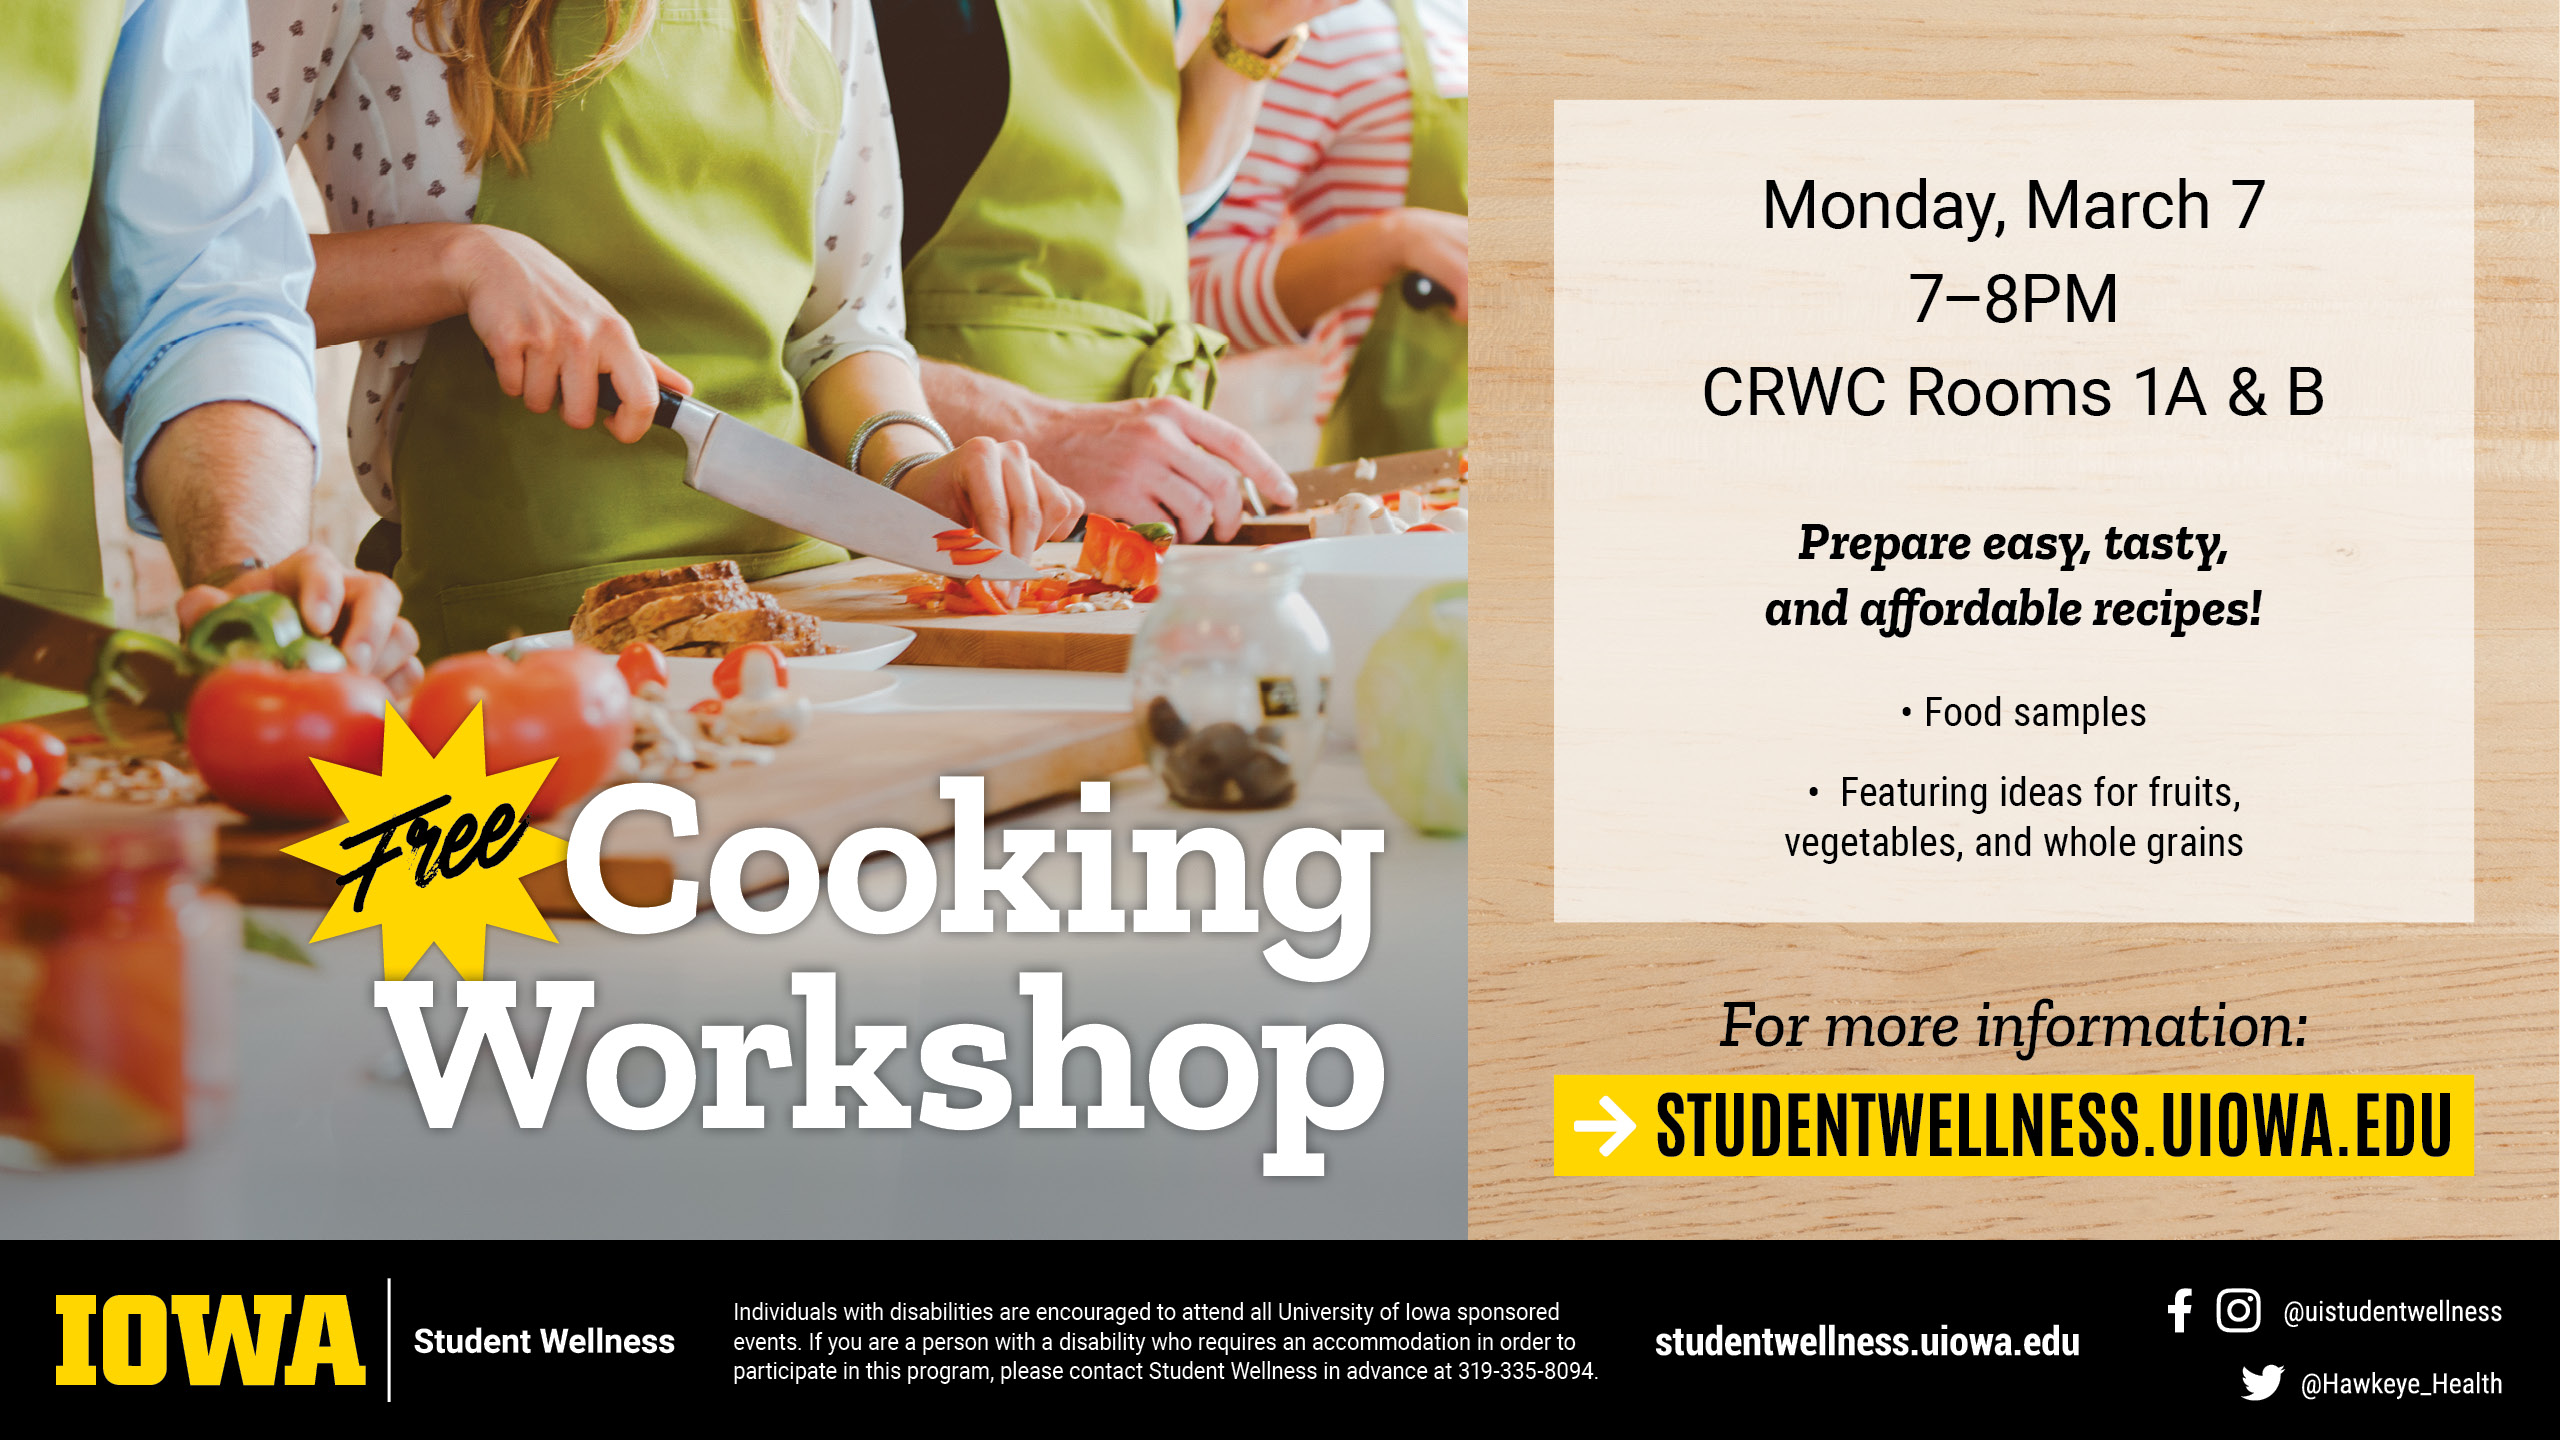 FREE Cooking Workshop. Monday, March 7 7-8PM CRWC Rooms 1A & 1B. Prepare easy, tasty, and affordable recipes! Food samples. Featuring ideas for fruits, vegetables, and whole grains. For more information: studentwellness.uiowa.edu